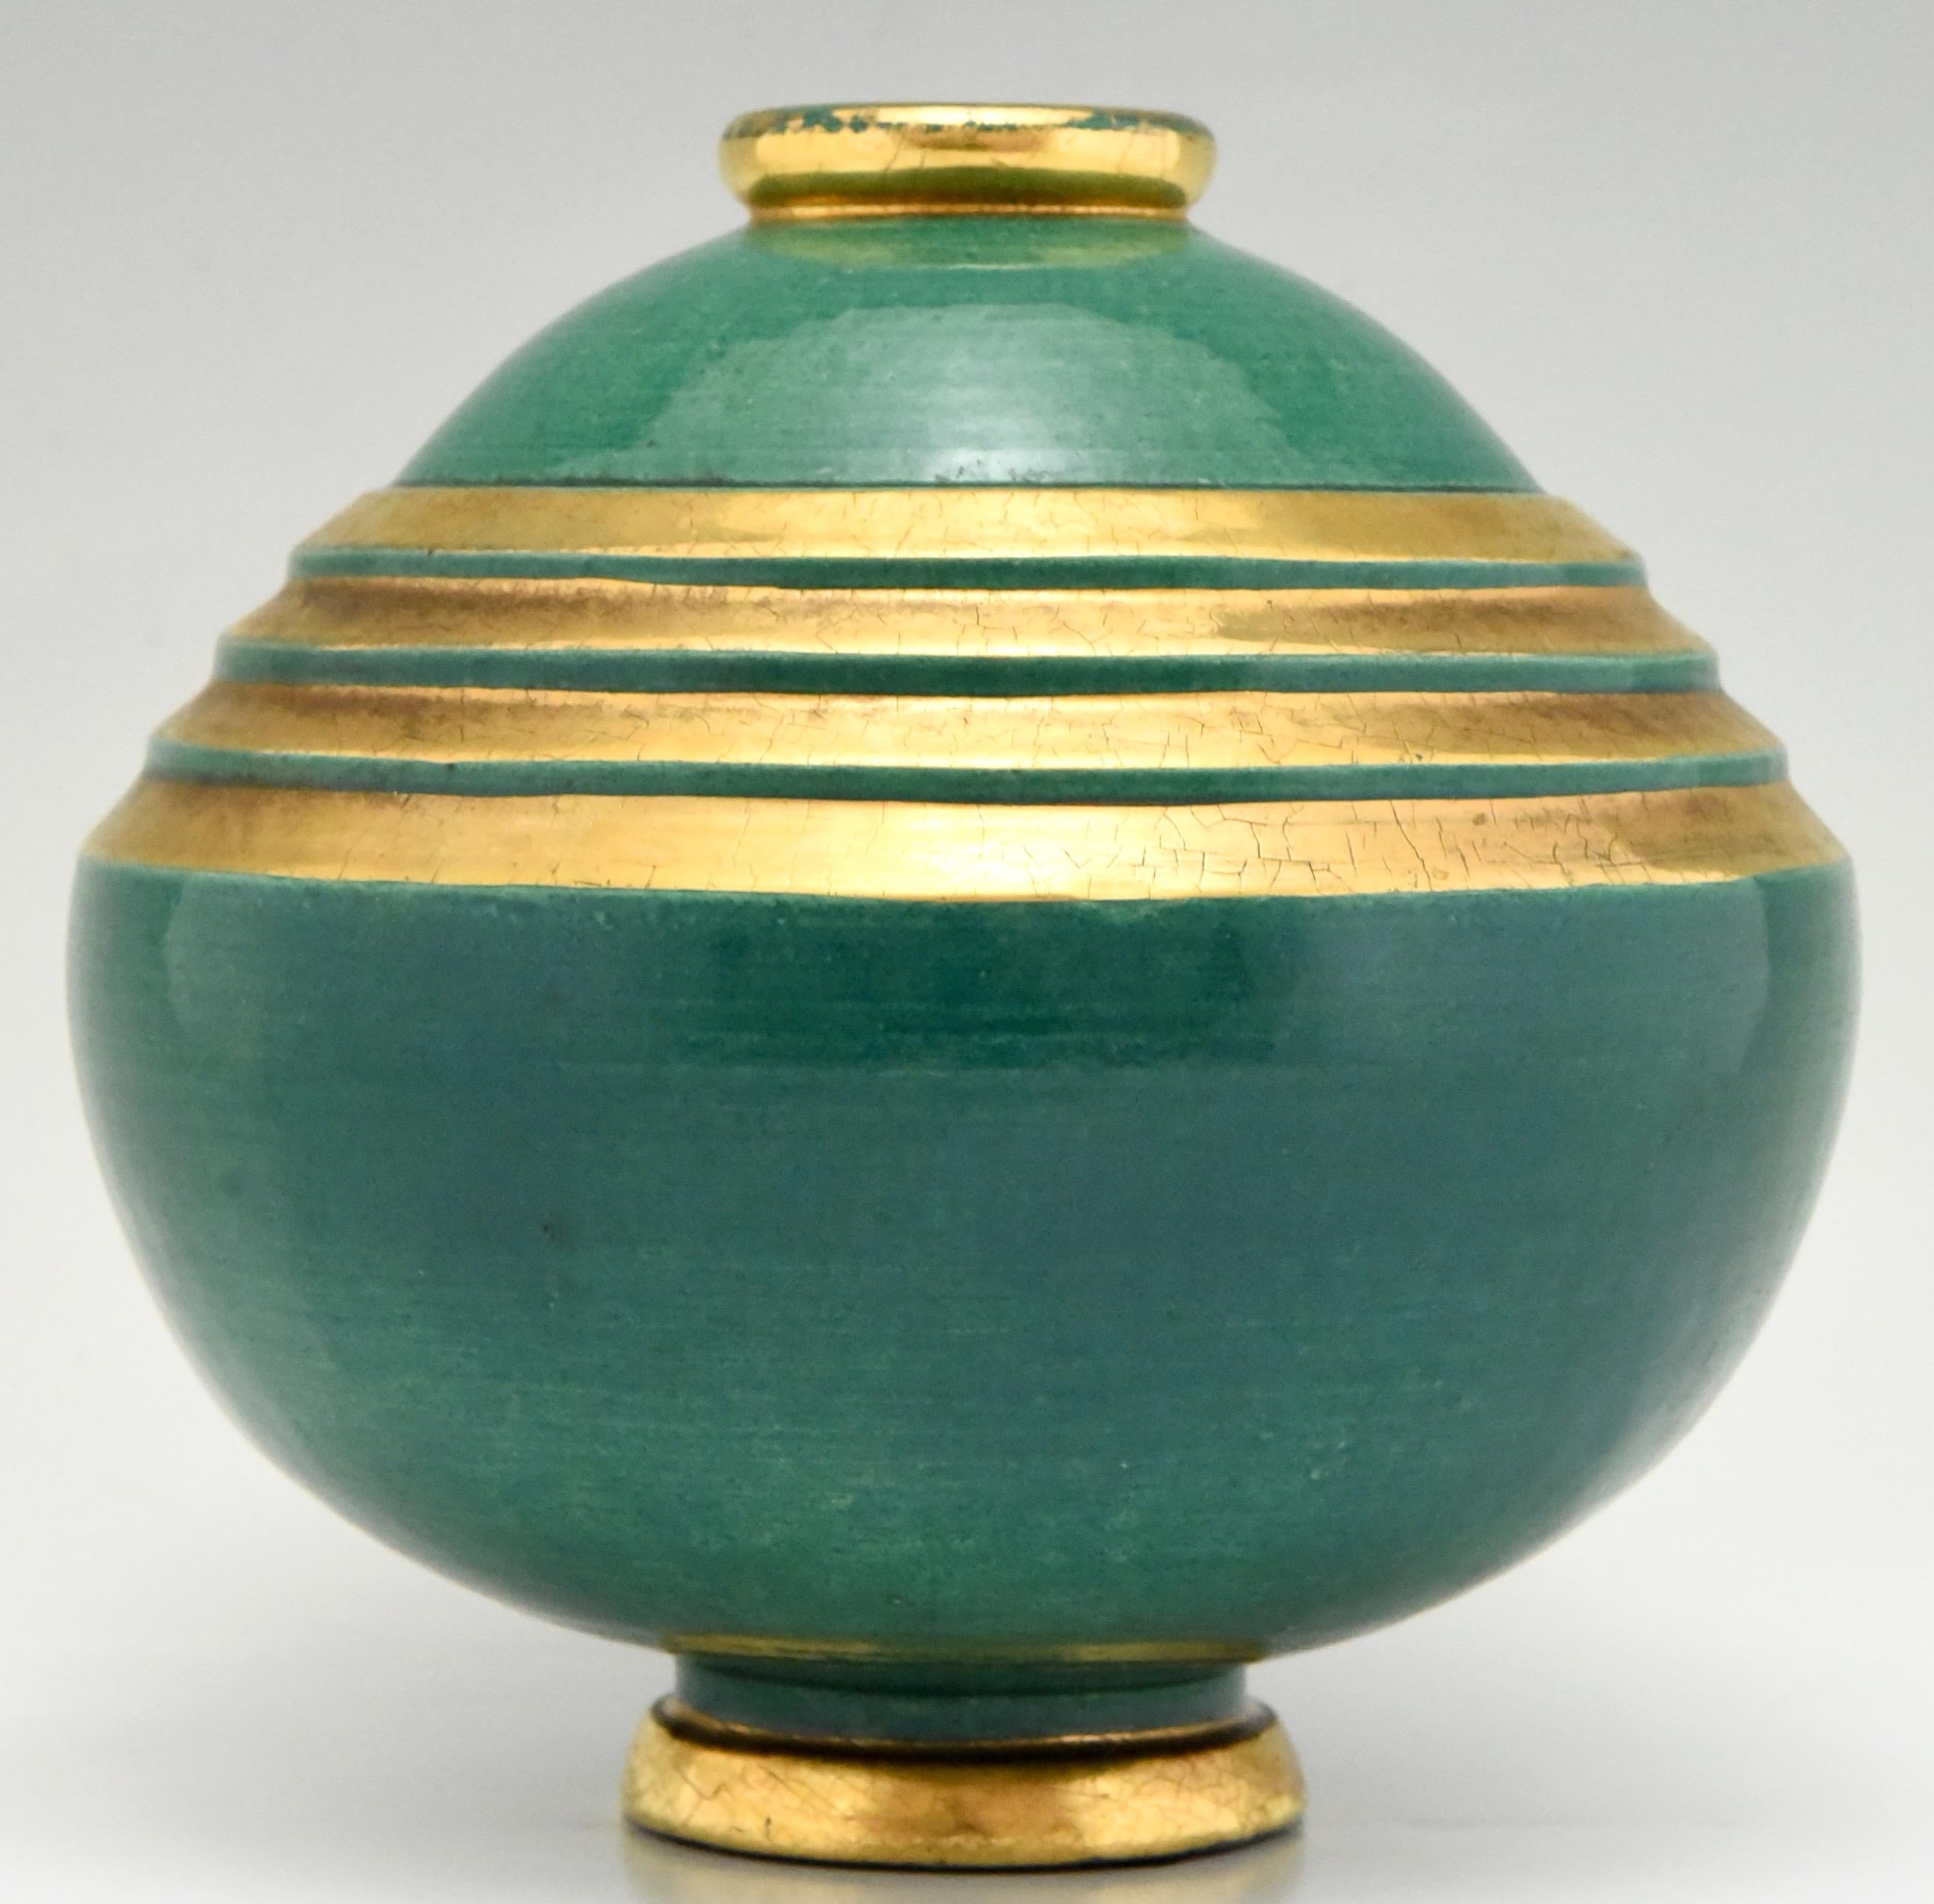 Beautiful green gold Art Deco vase in Grès ceramic.
The vase is signed Frassati for Marcel Guillard and executed by Etling Paris, France, 1925.
Literature:
“Art Deco complete” Alastair Duncan?“Dictionnaire Biographique des artistes